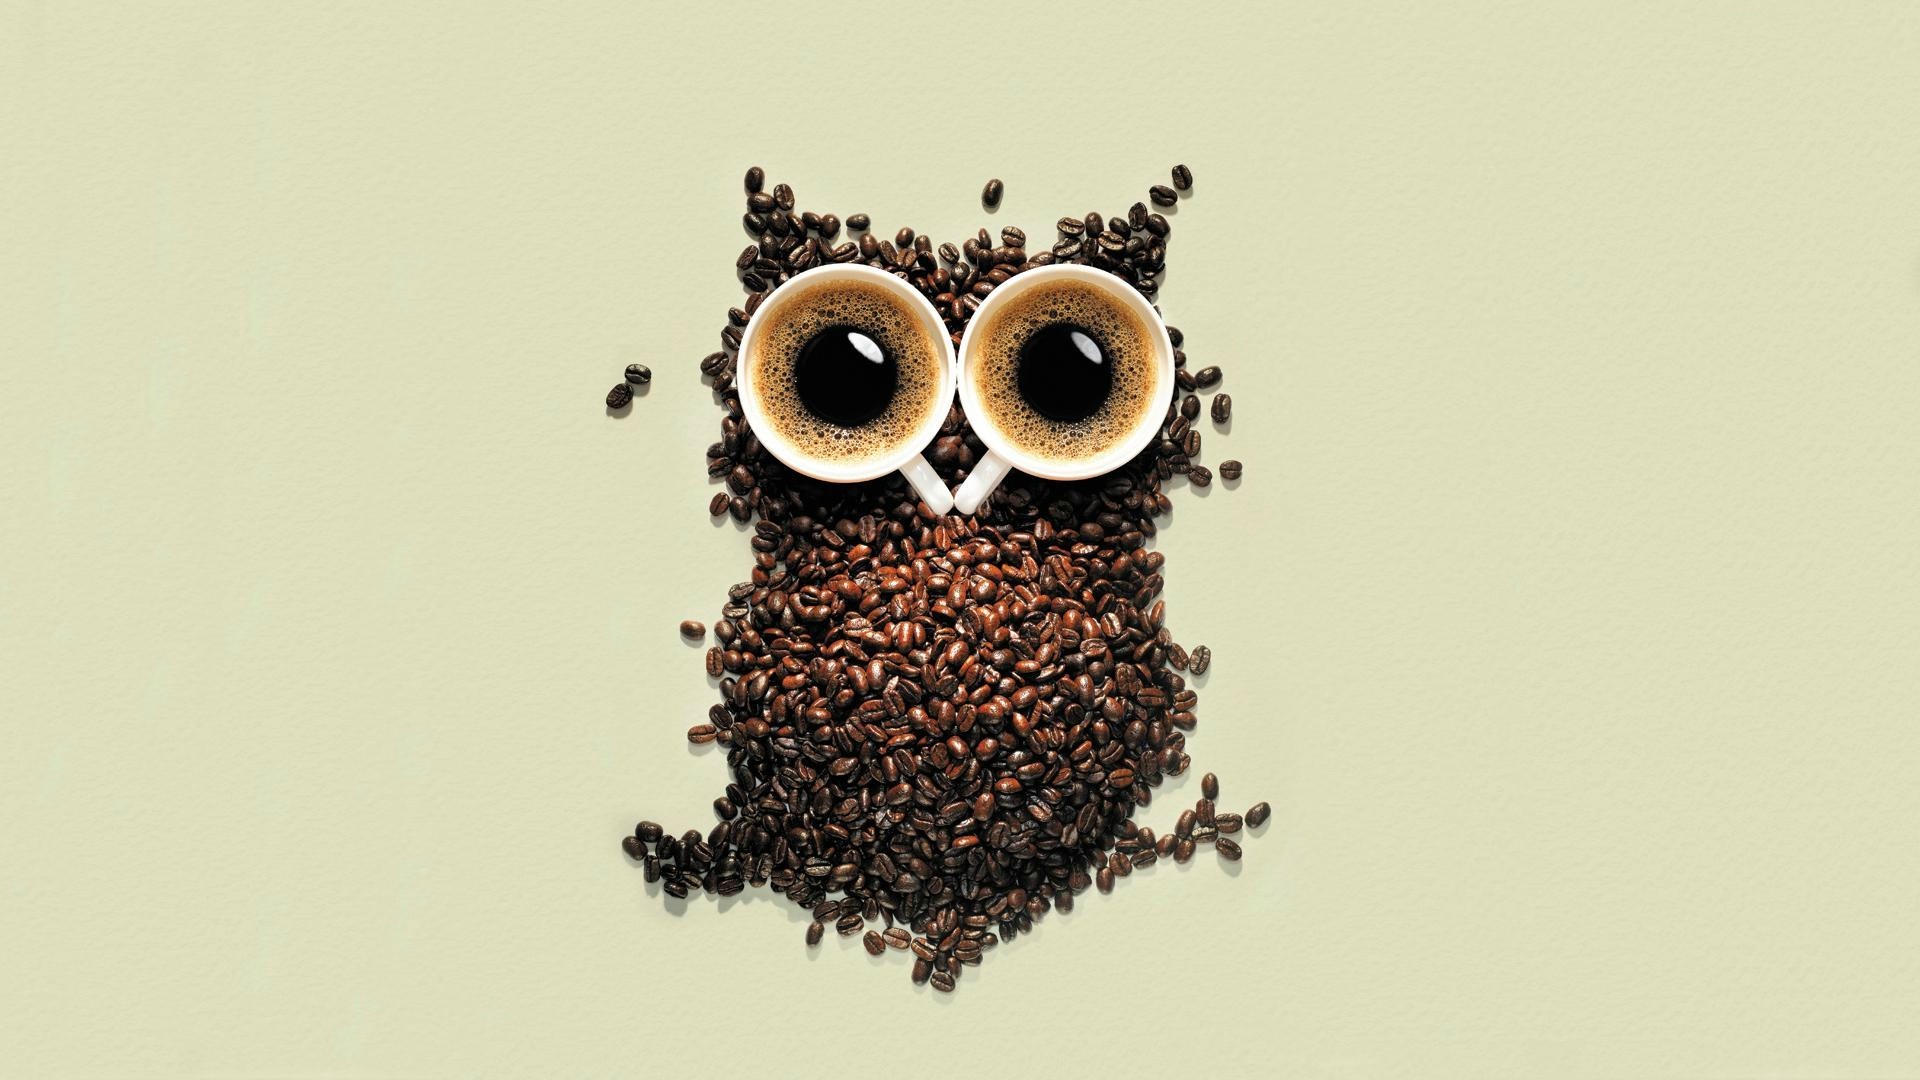 Cute Starbucks Coffe Wallpaper Owl - Awesome Wm Config , HD Wallpaper & Backgrounds